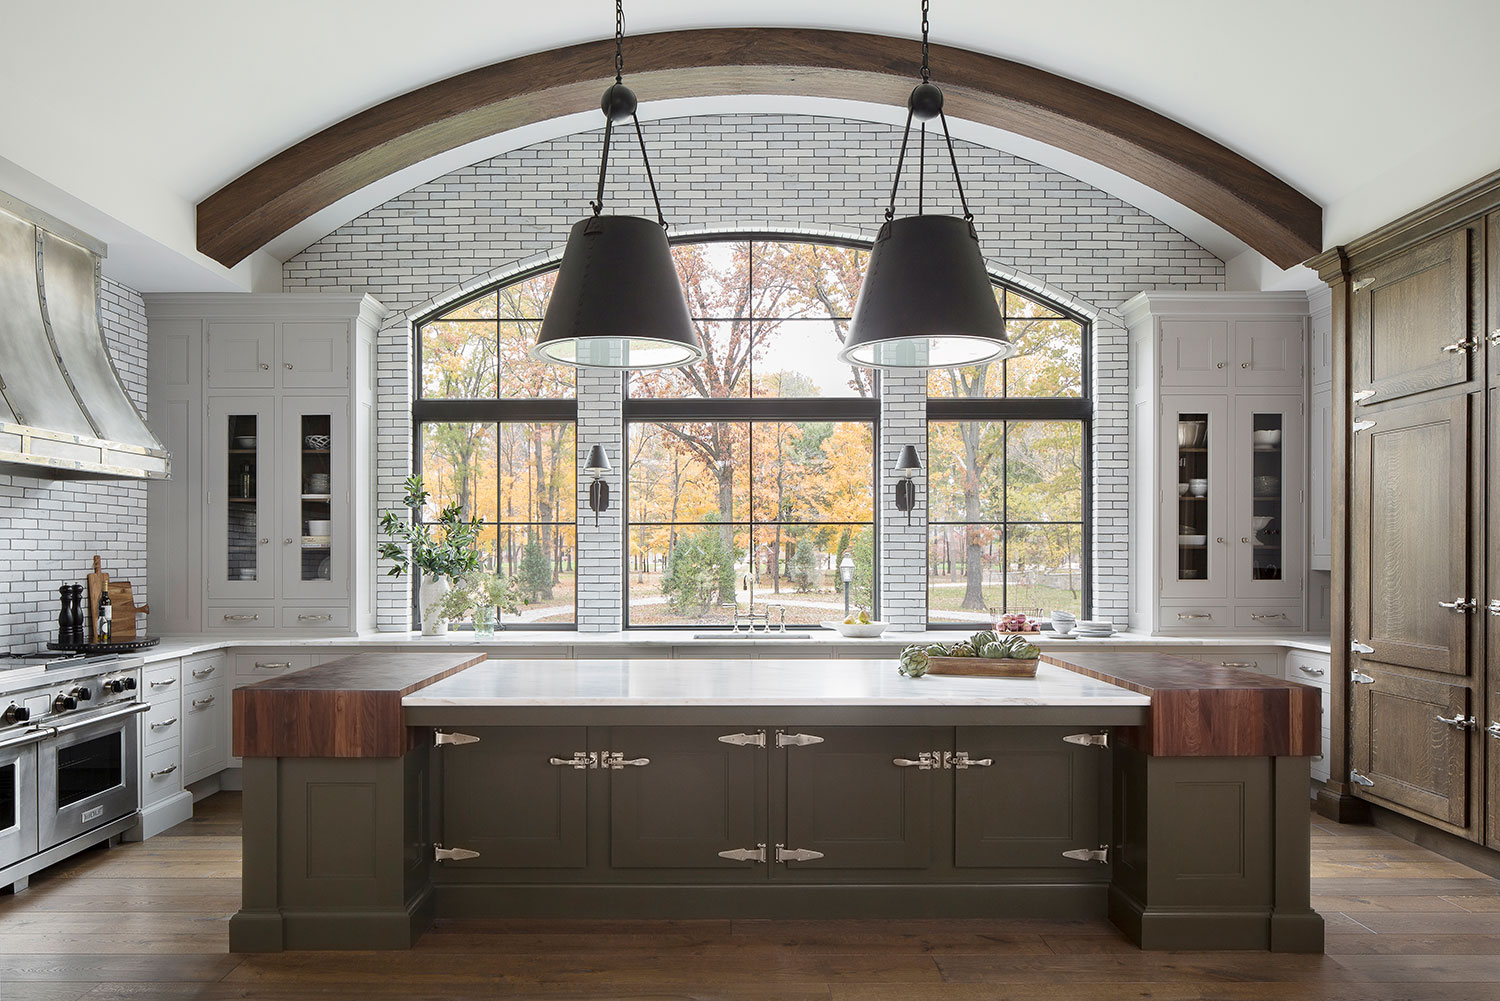 10 Kitchen Design Trends Designers Can’t Get Enough Of